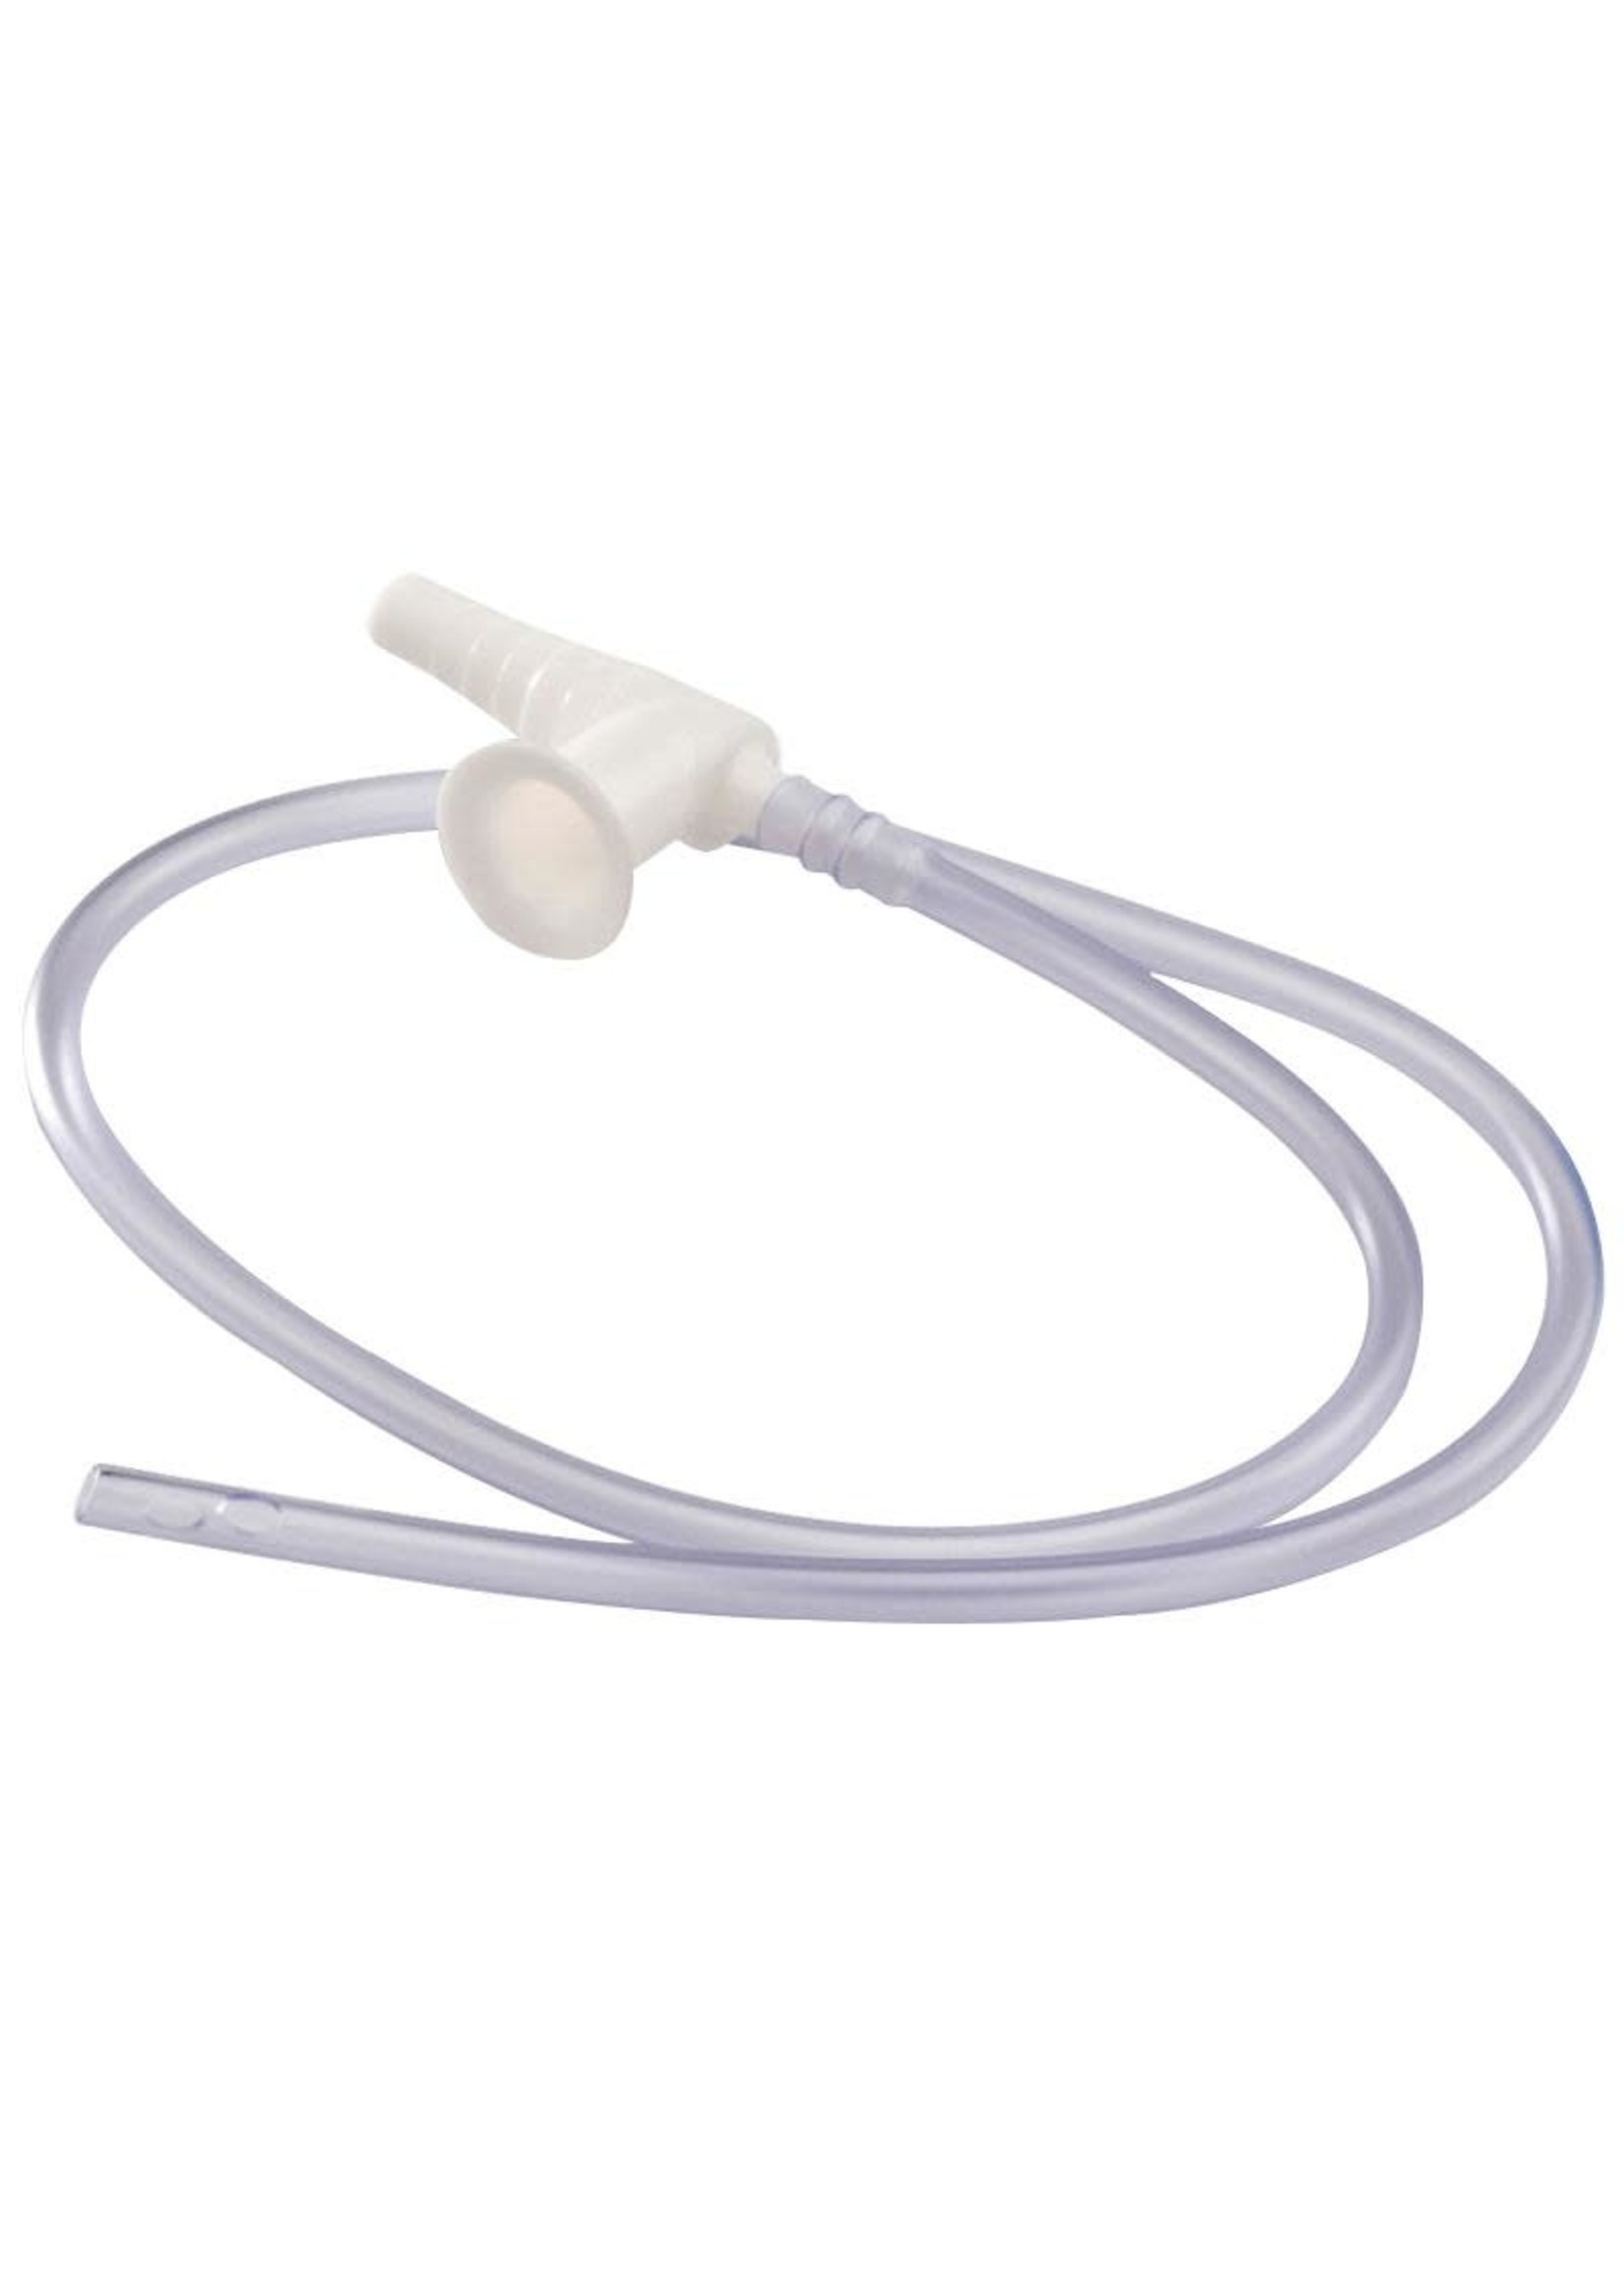 Suction Catheter, 6 French